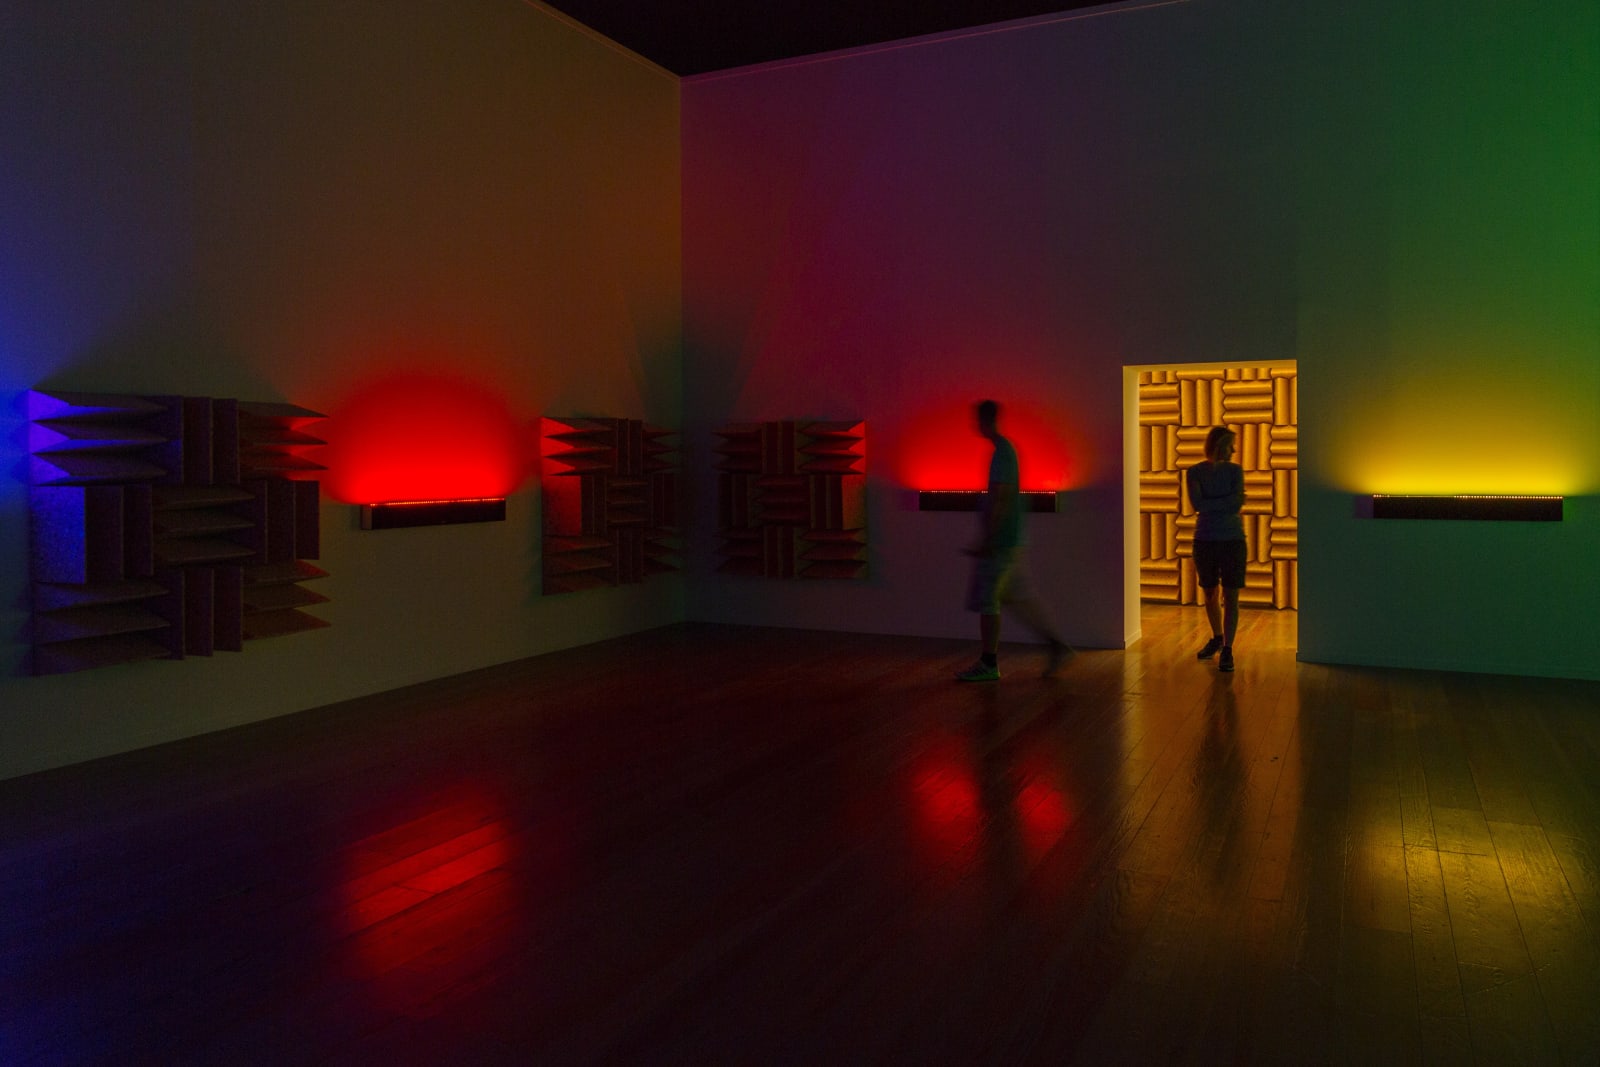 Haroon Mirza, A Chamber for Horwitz; Sonakinatography Transcriptions in Surround Sound (2015) based on works by Channa Horwitz | Installation view at Museum Tinguely, Basel (2015) | Photo: Museum Tinguely